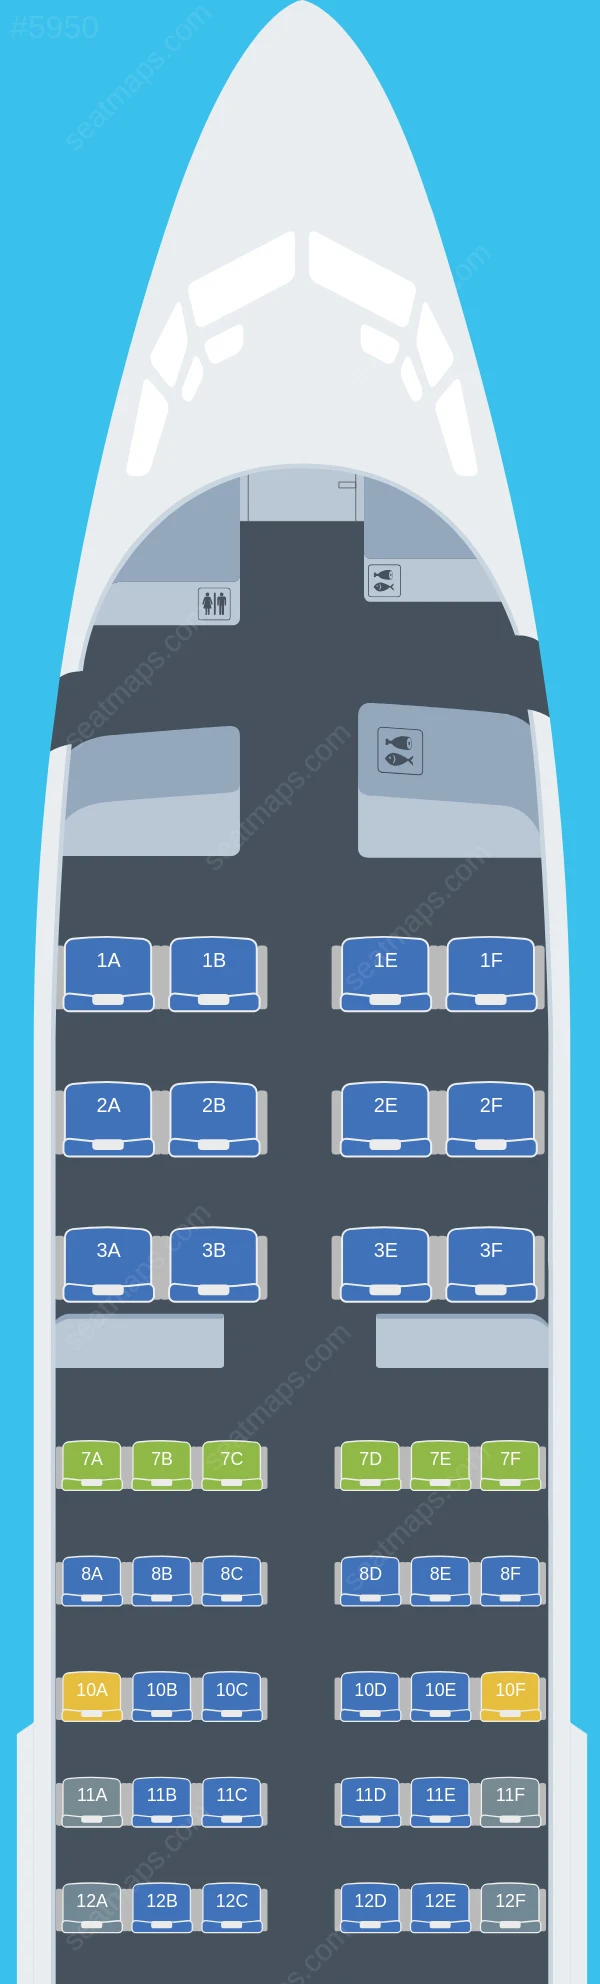 United Boeing 737-700 seatmap preview